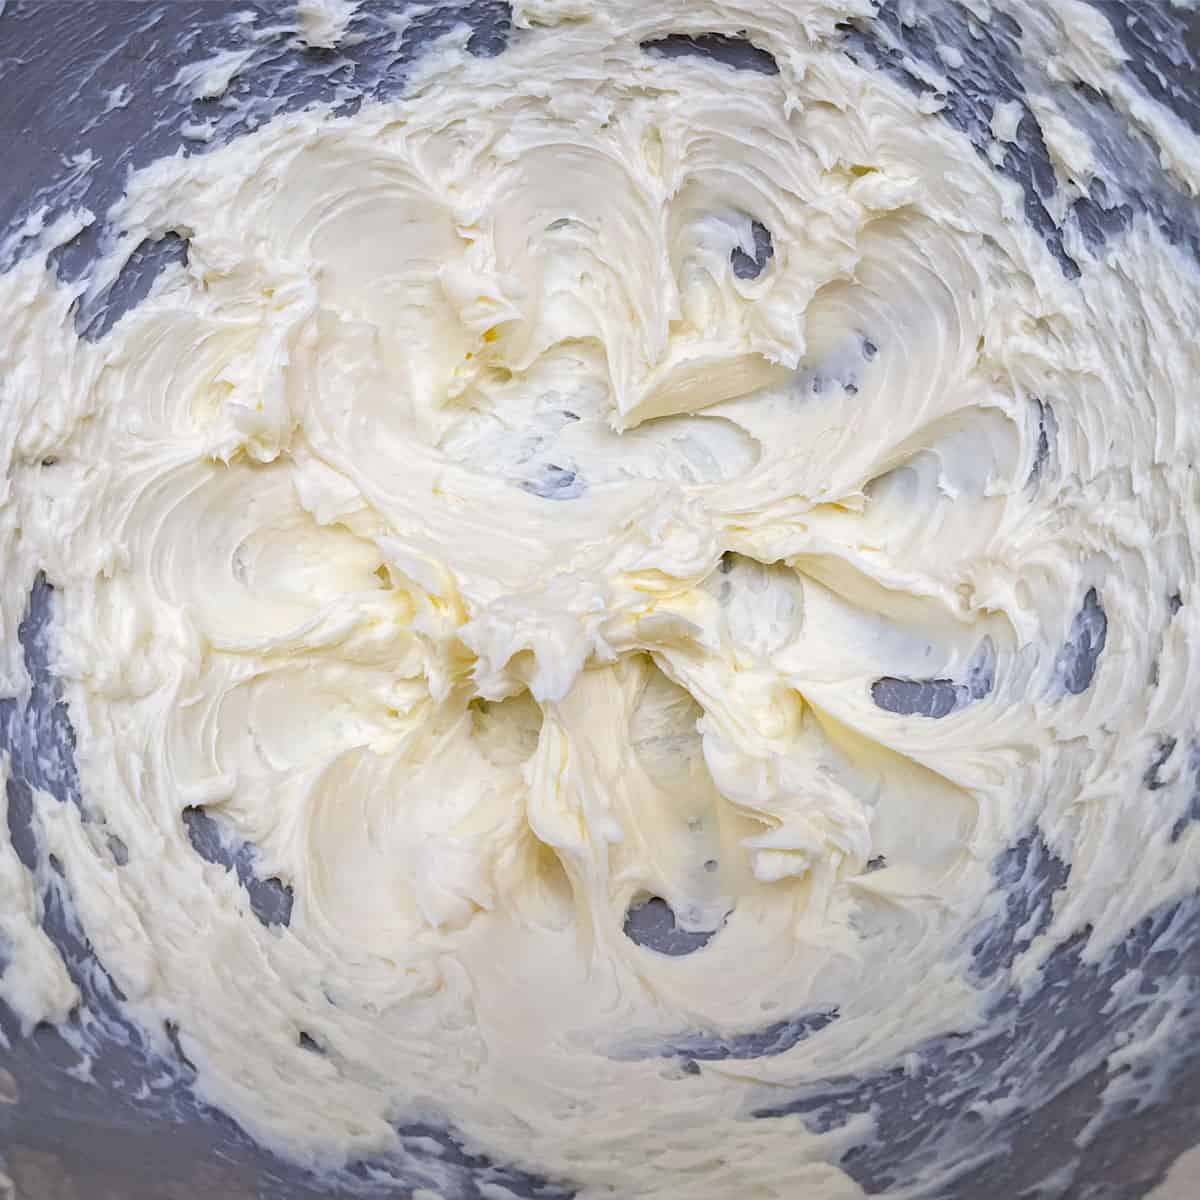 Butter and sugar mixed for 3 minutes and now it looks creamy with peaks.